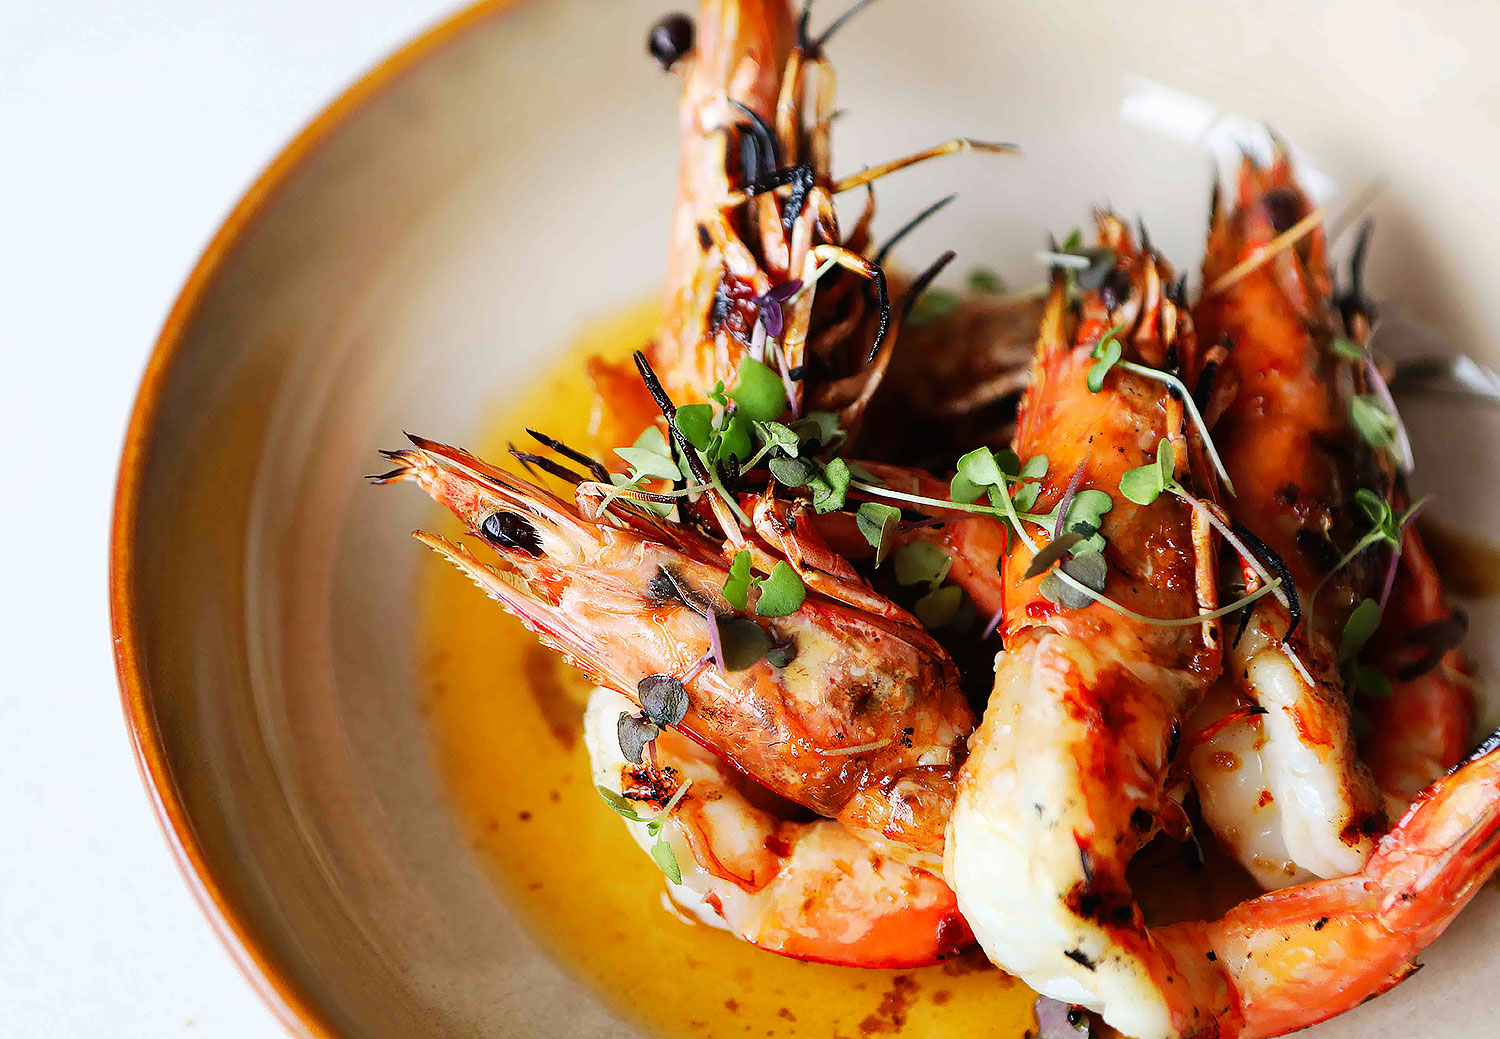 Wonderfully charred smokey flavours are a feature of the locally caught BBQ prawns